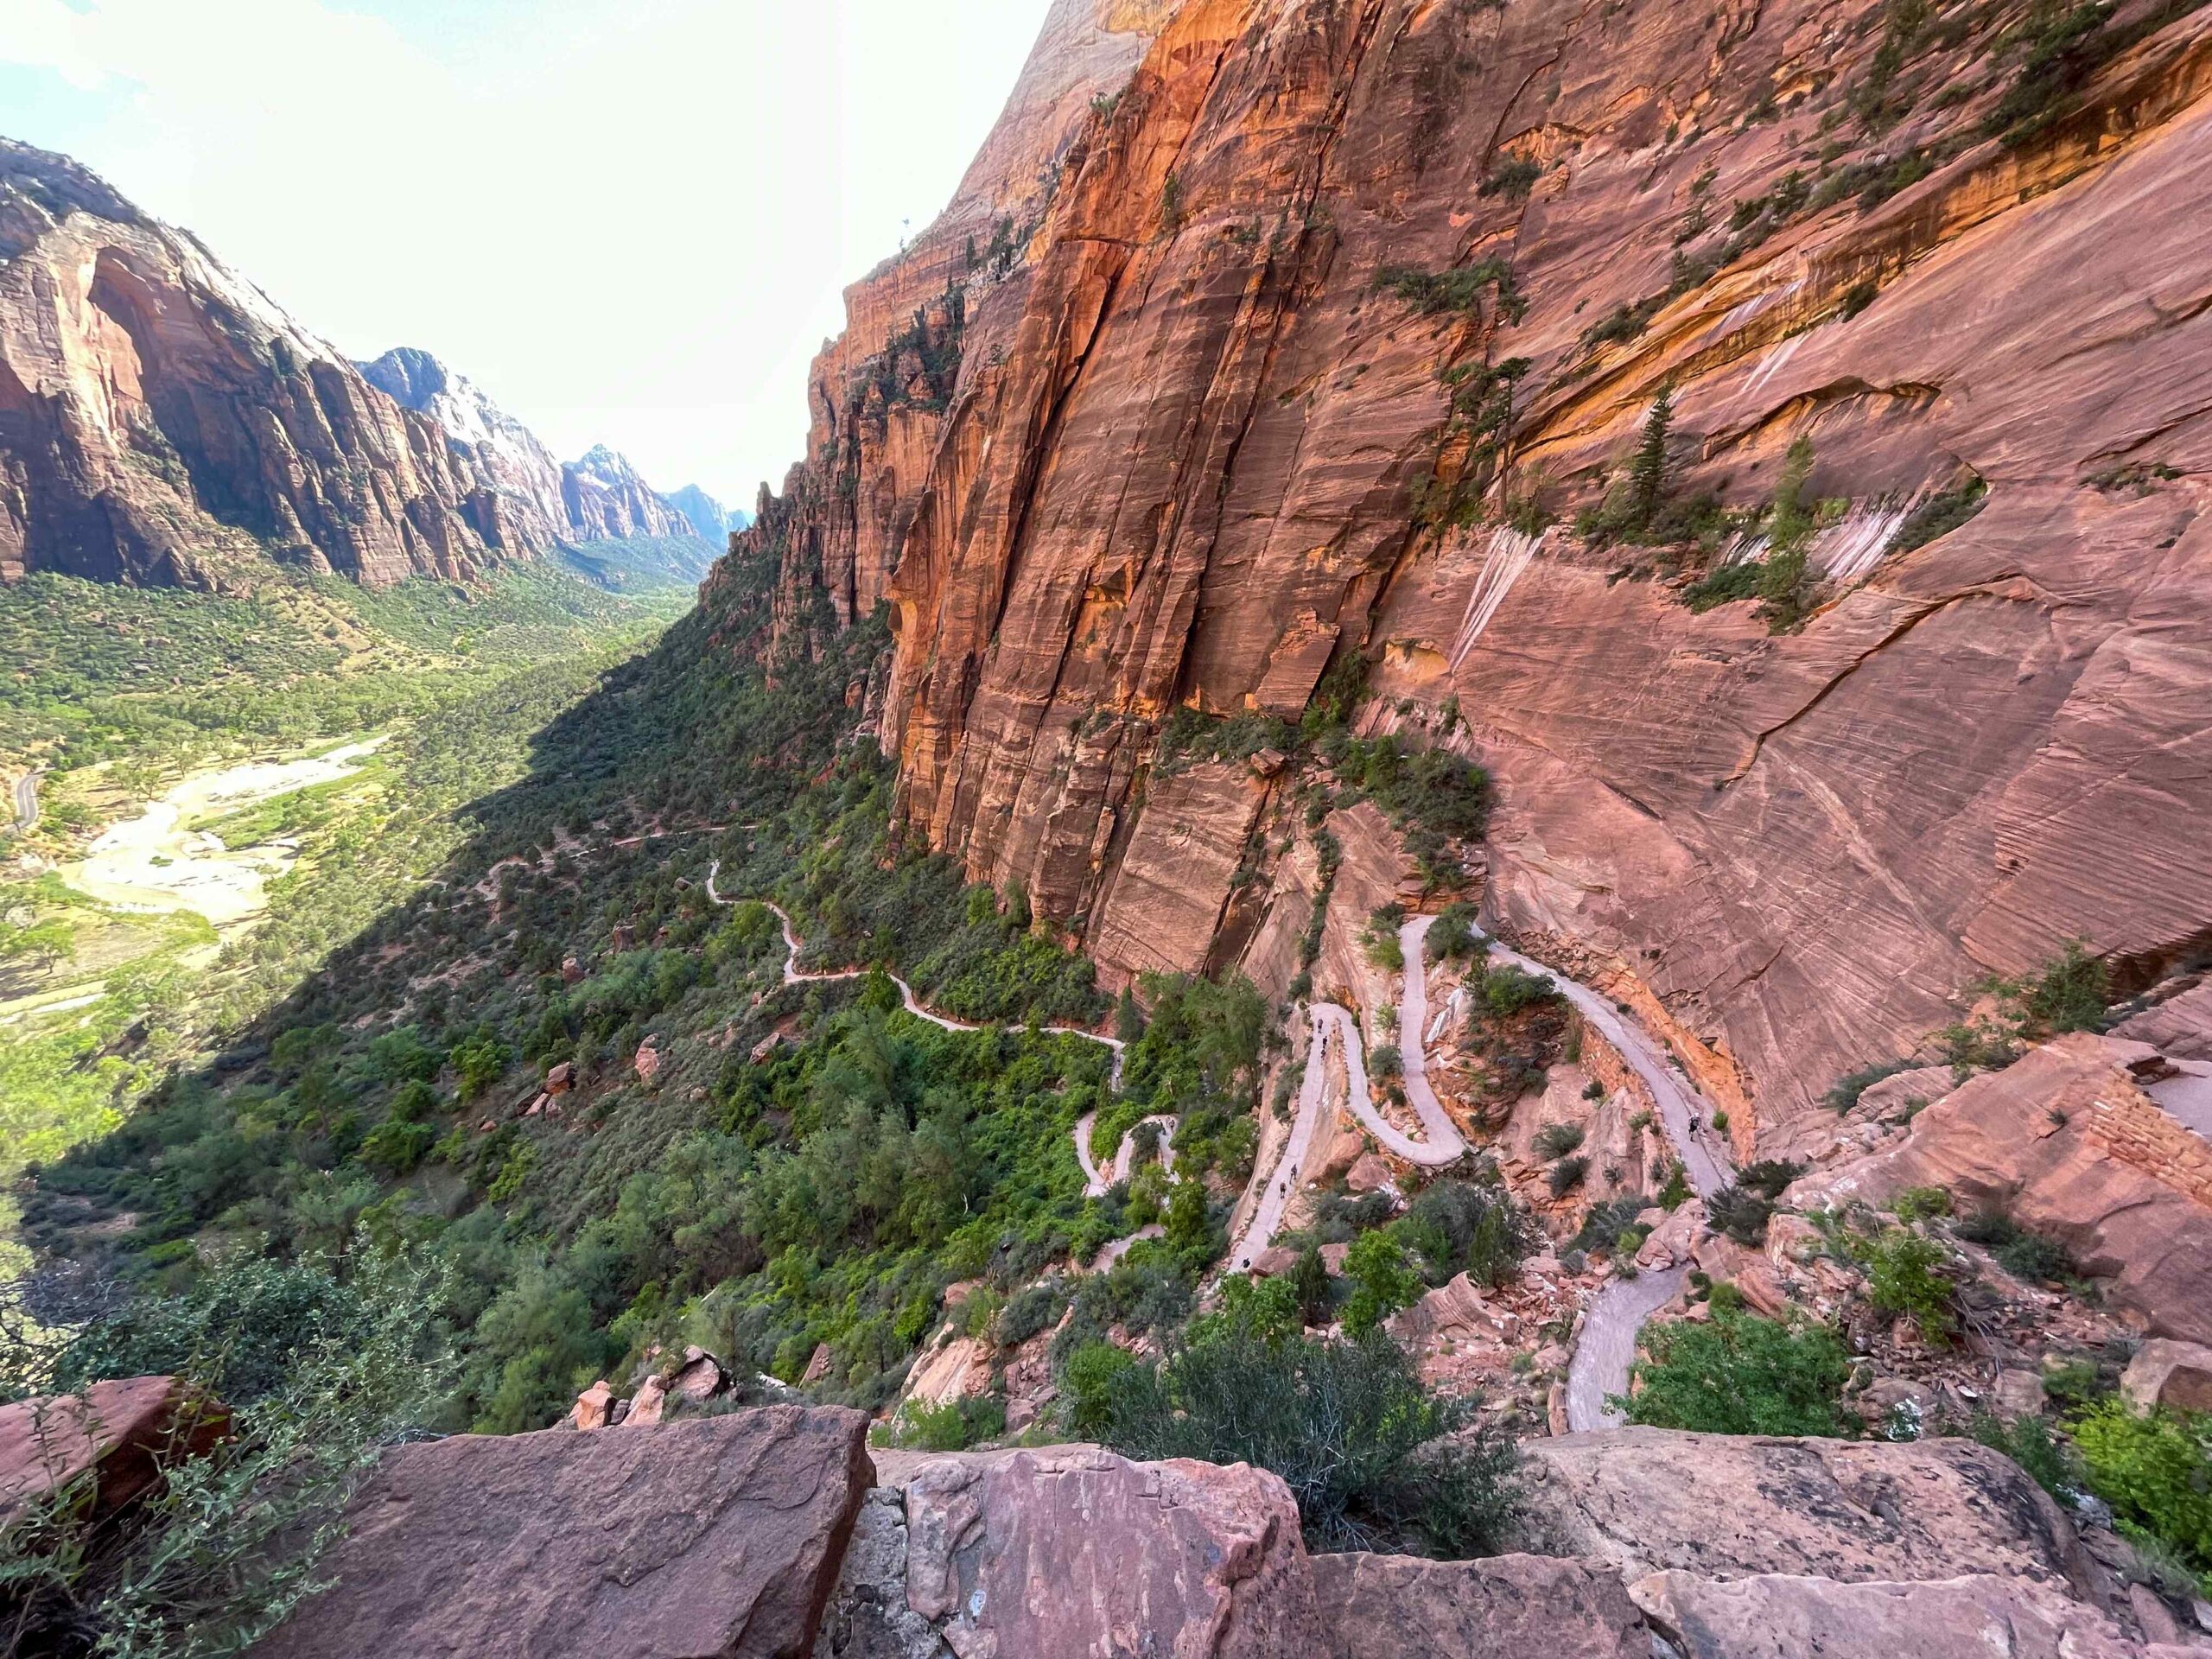 View of the West Rim Trail in Zion Canyon